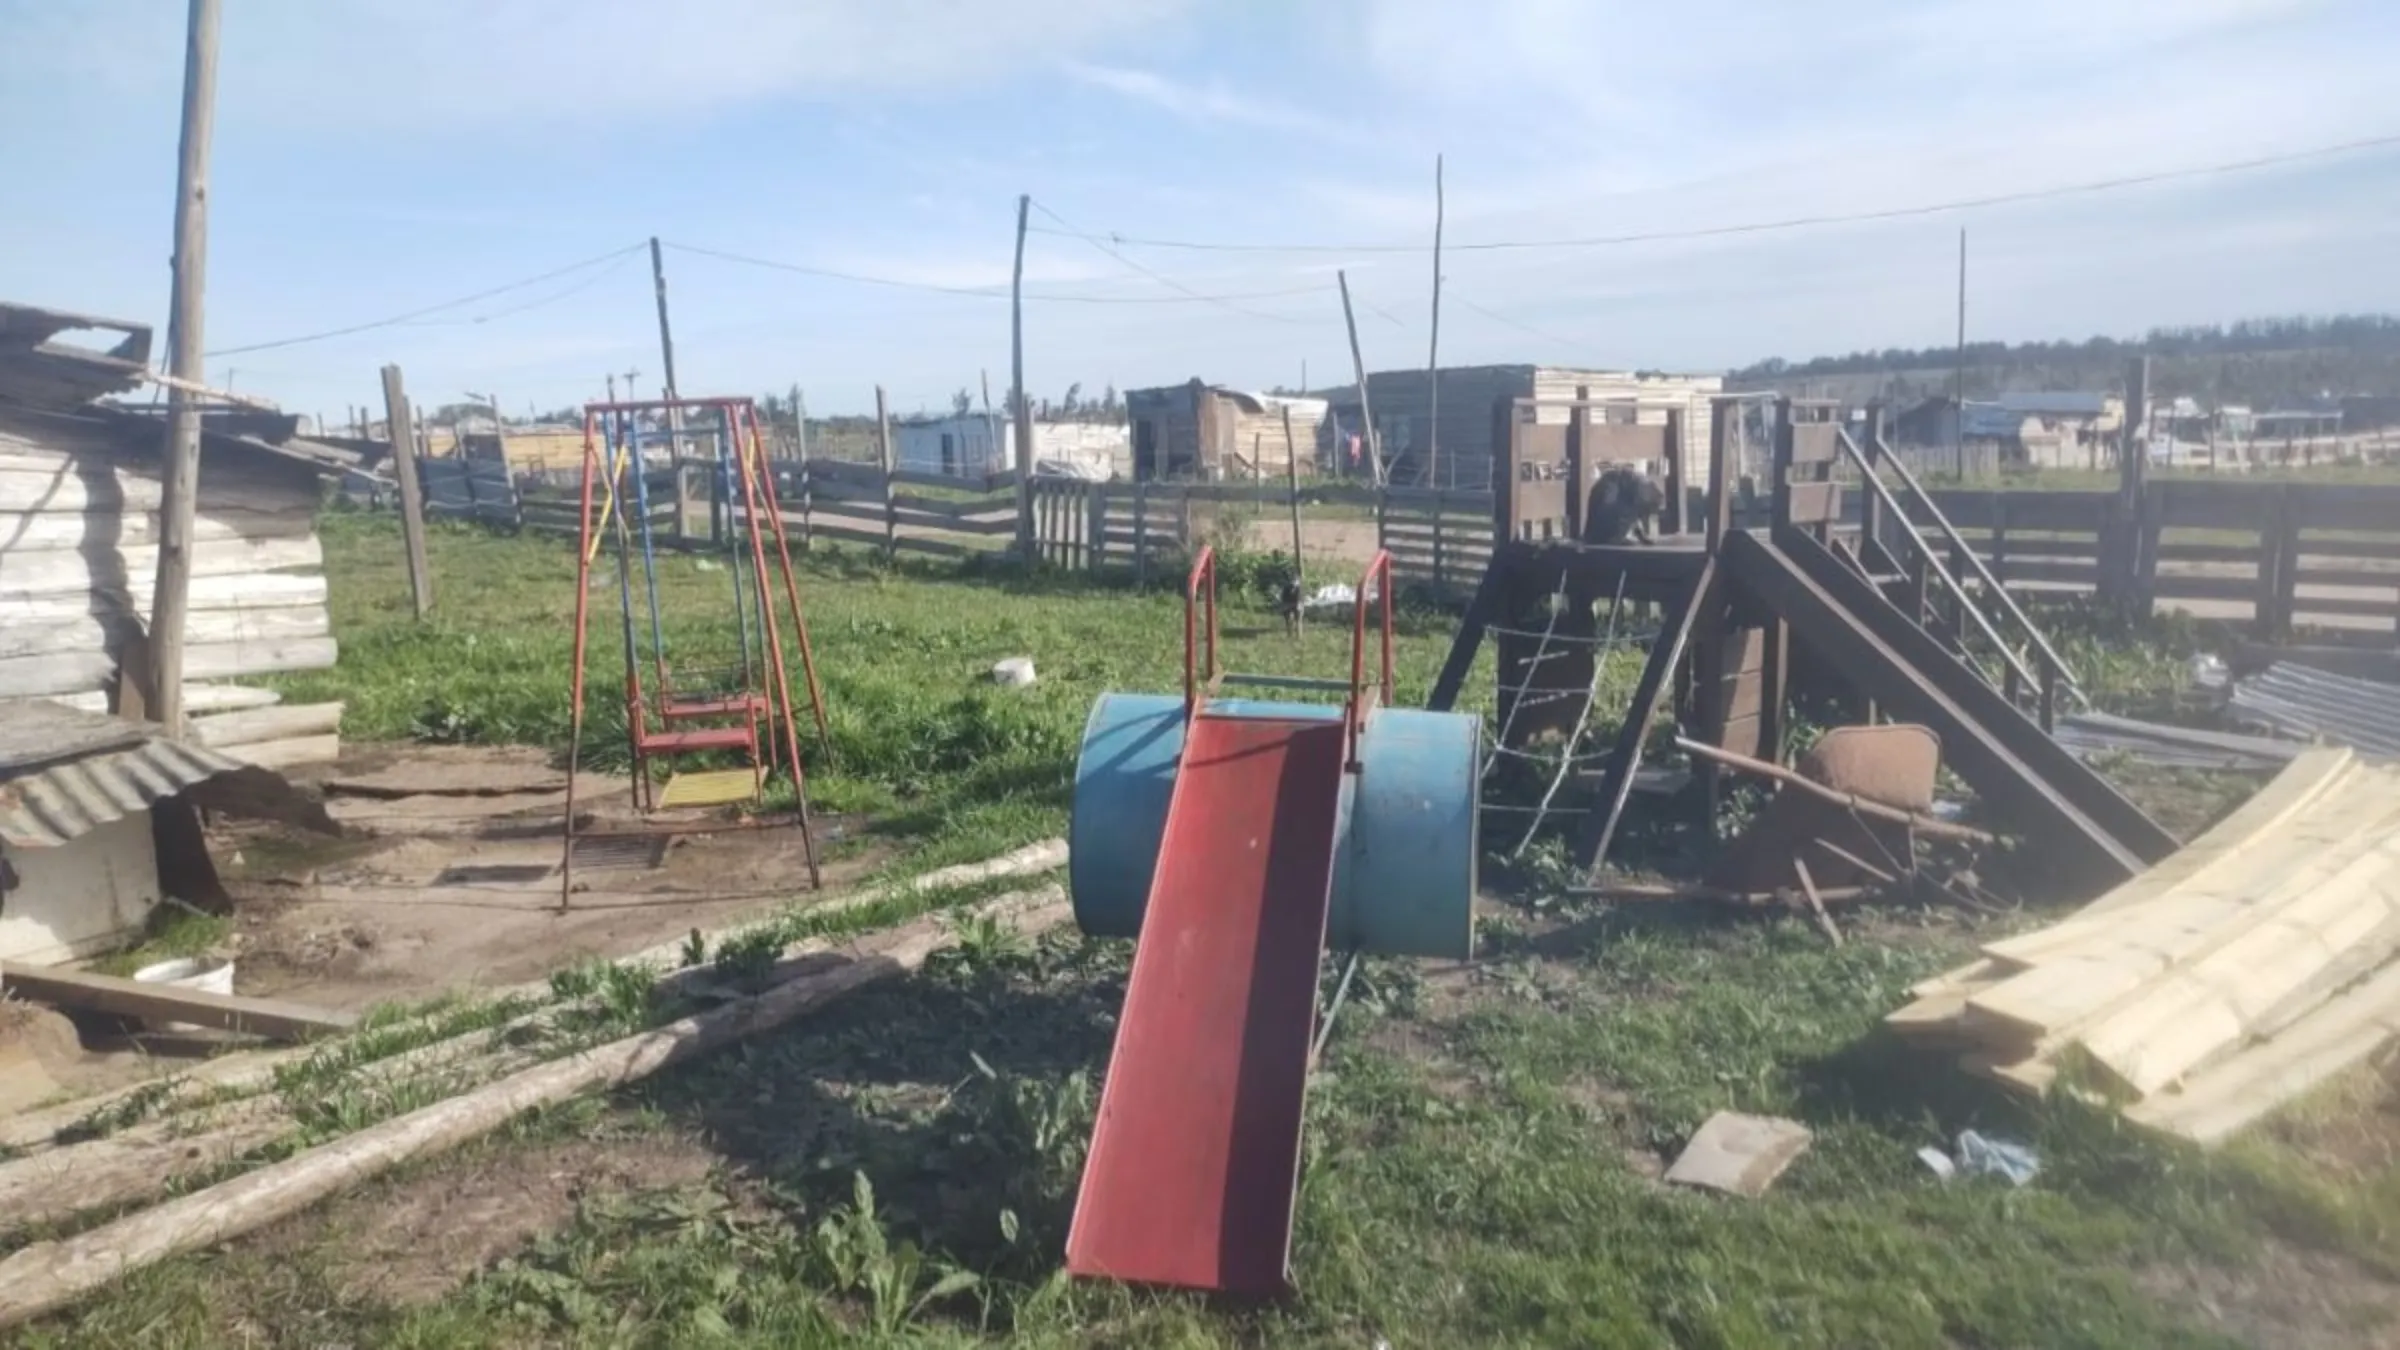 A children's playground is portraited in Nuevo Comienzo, a poor neighborhood on the outskirts of Montevideo. Thomson Reuters Foundation/ Fabiana Molina.